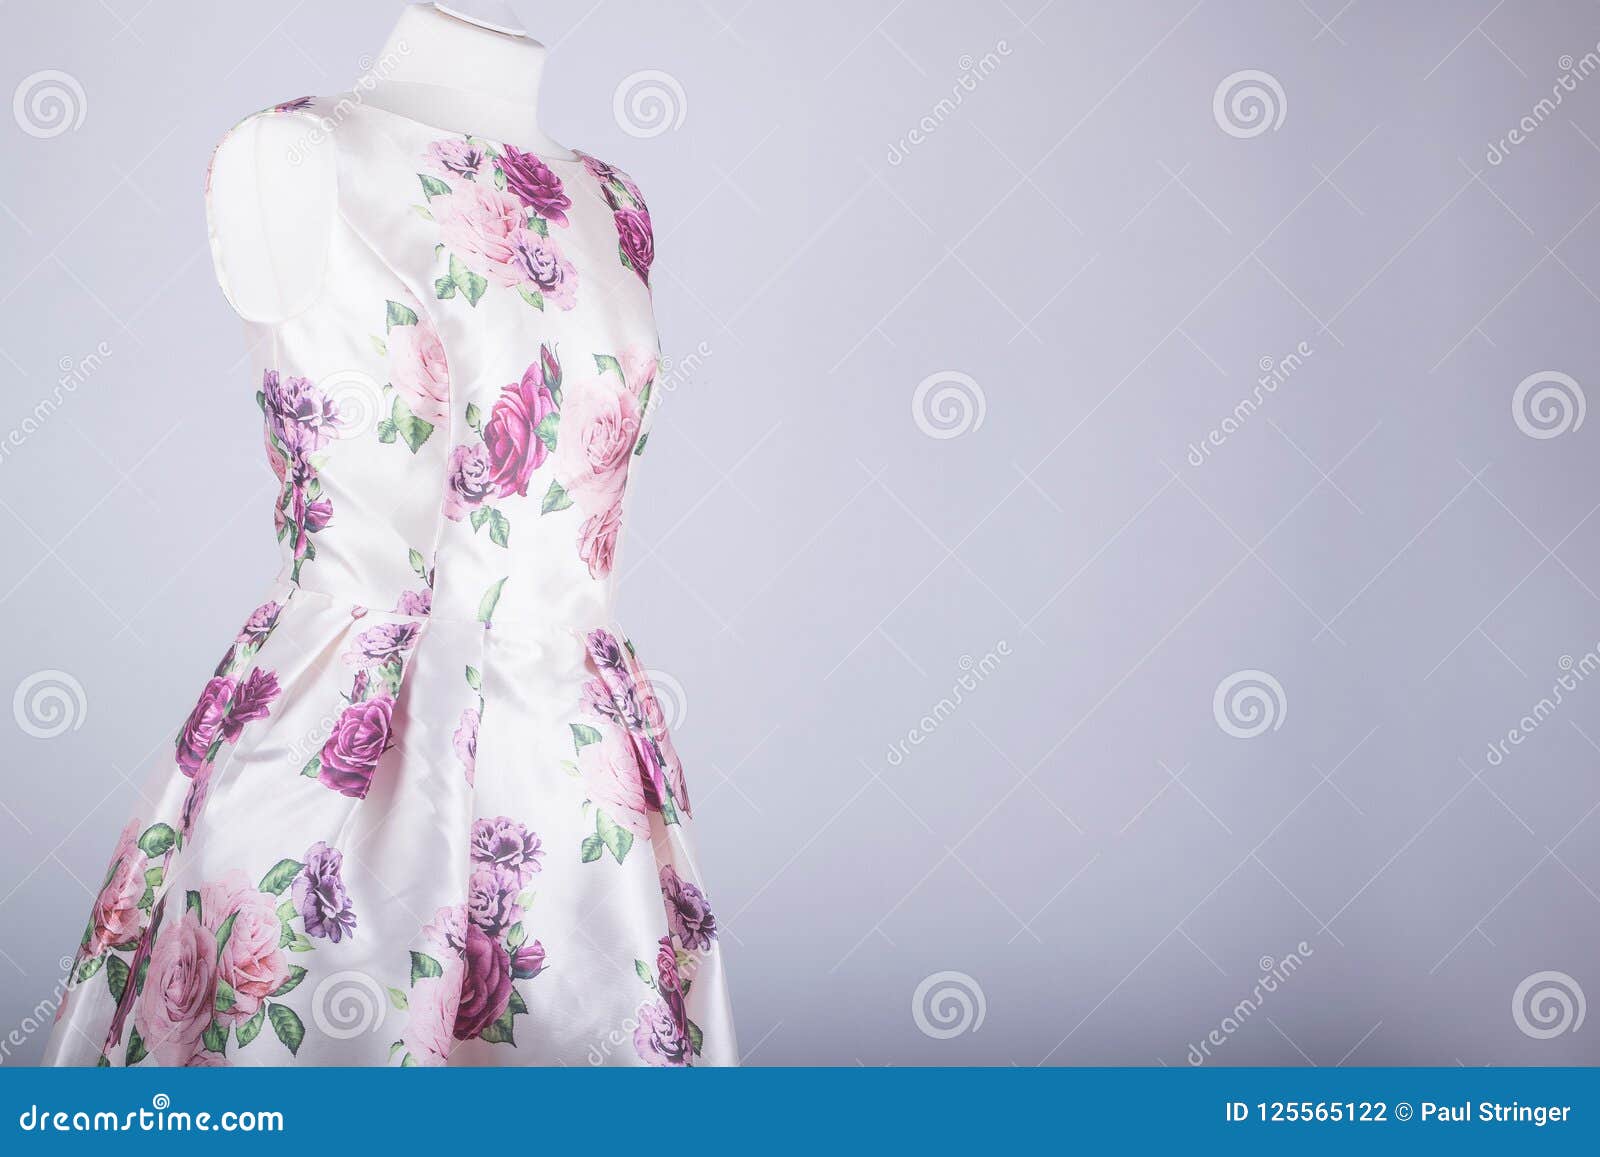 Tailors Mannequin Dressed in a Floral Dress Stock Photo - Image of ...